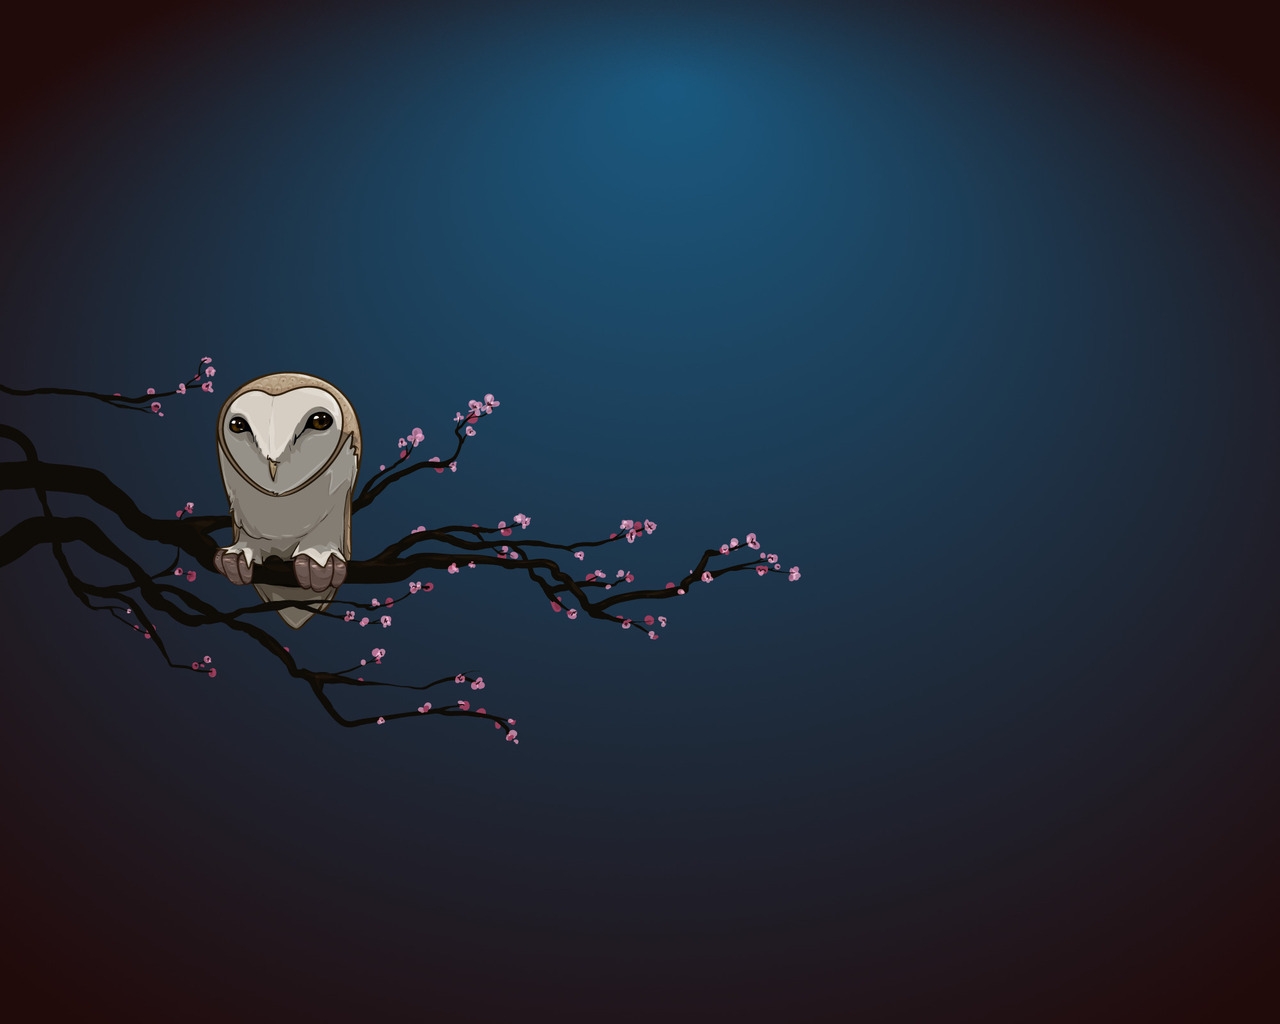 Owl Alone for 1280 x 1024 resolution